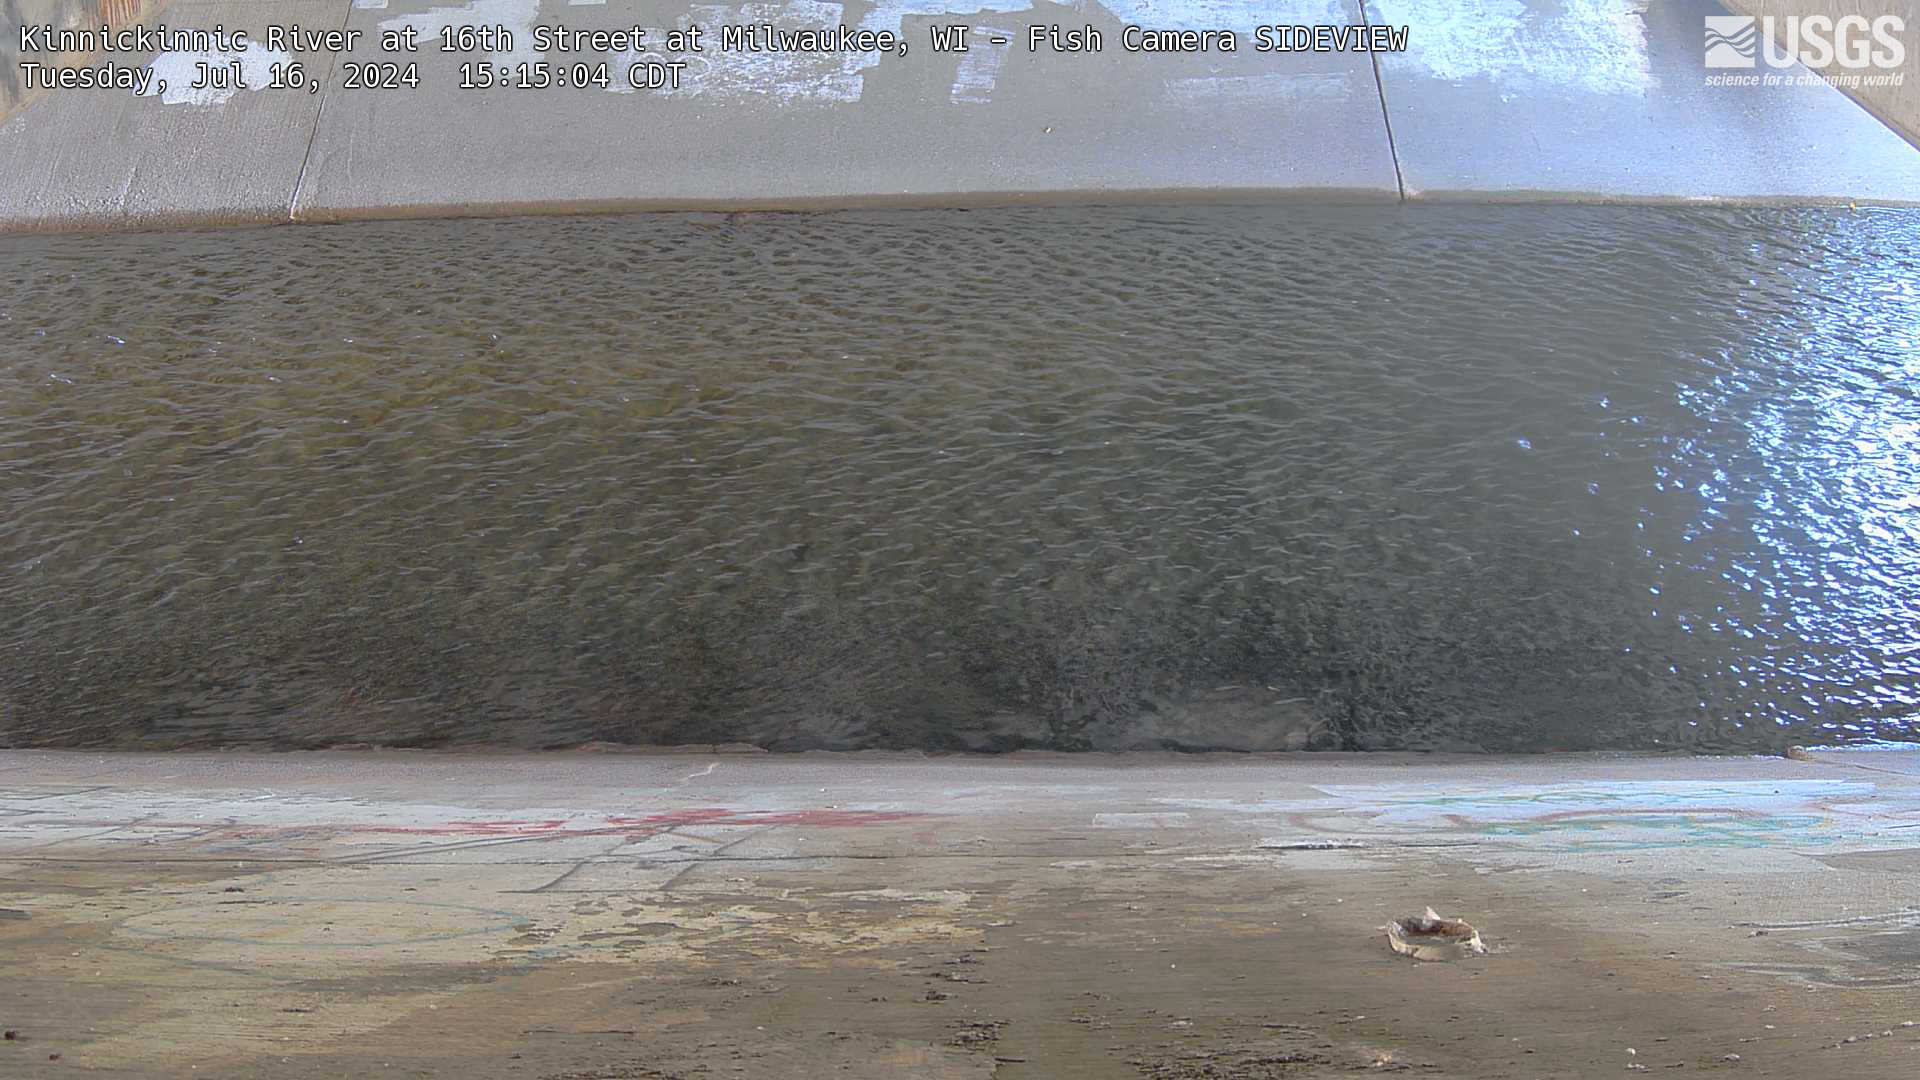 Time lapse video of webcam pointed at surface of stream from side, for fish monitoring